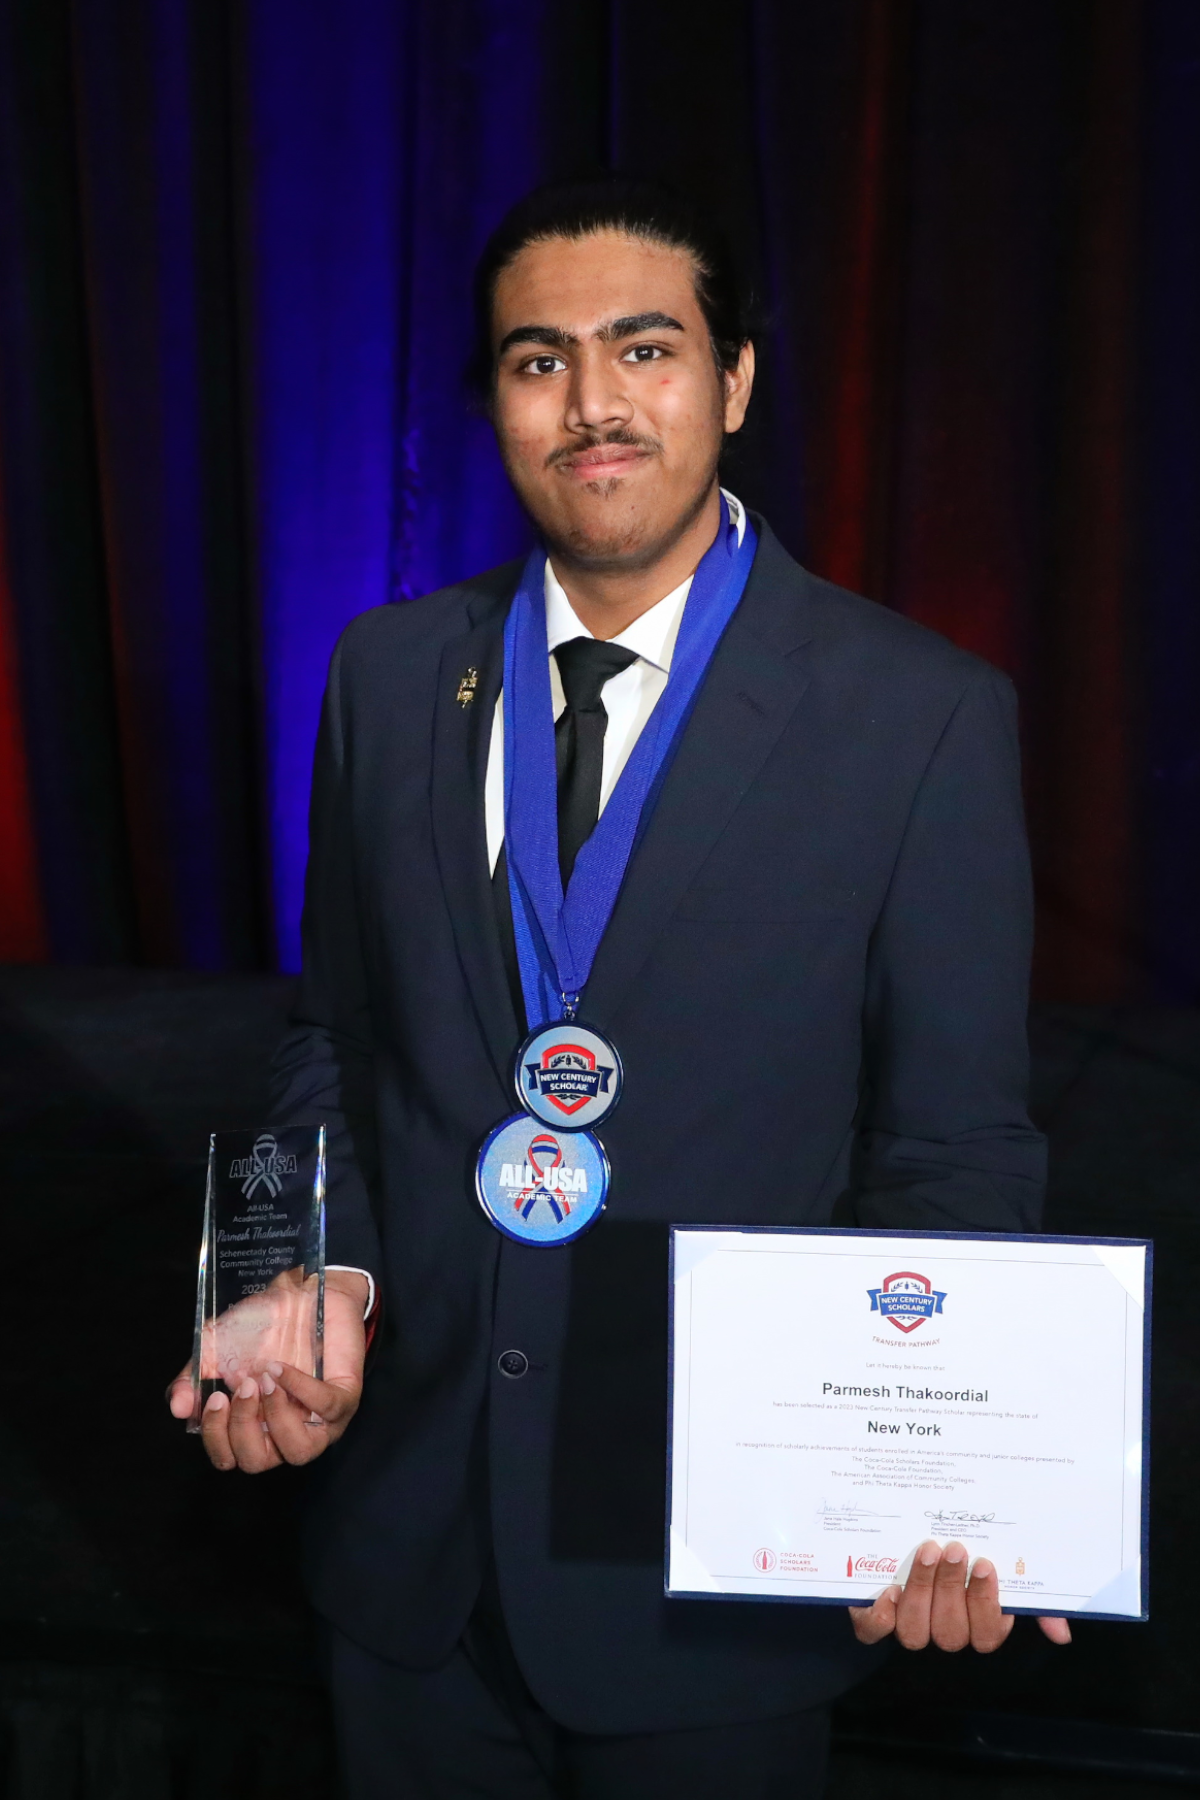 Parmesh Thakoordial smiling, holding awards for All-USA Academic Team and New Century Transfer Pathway Scholarship